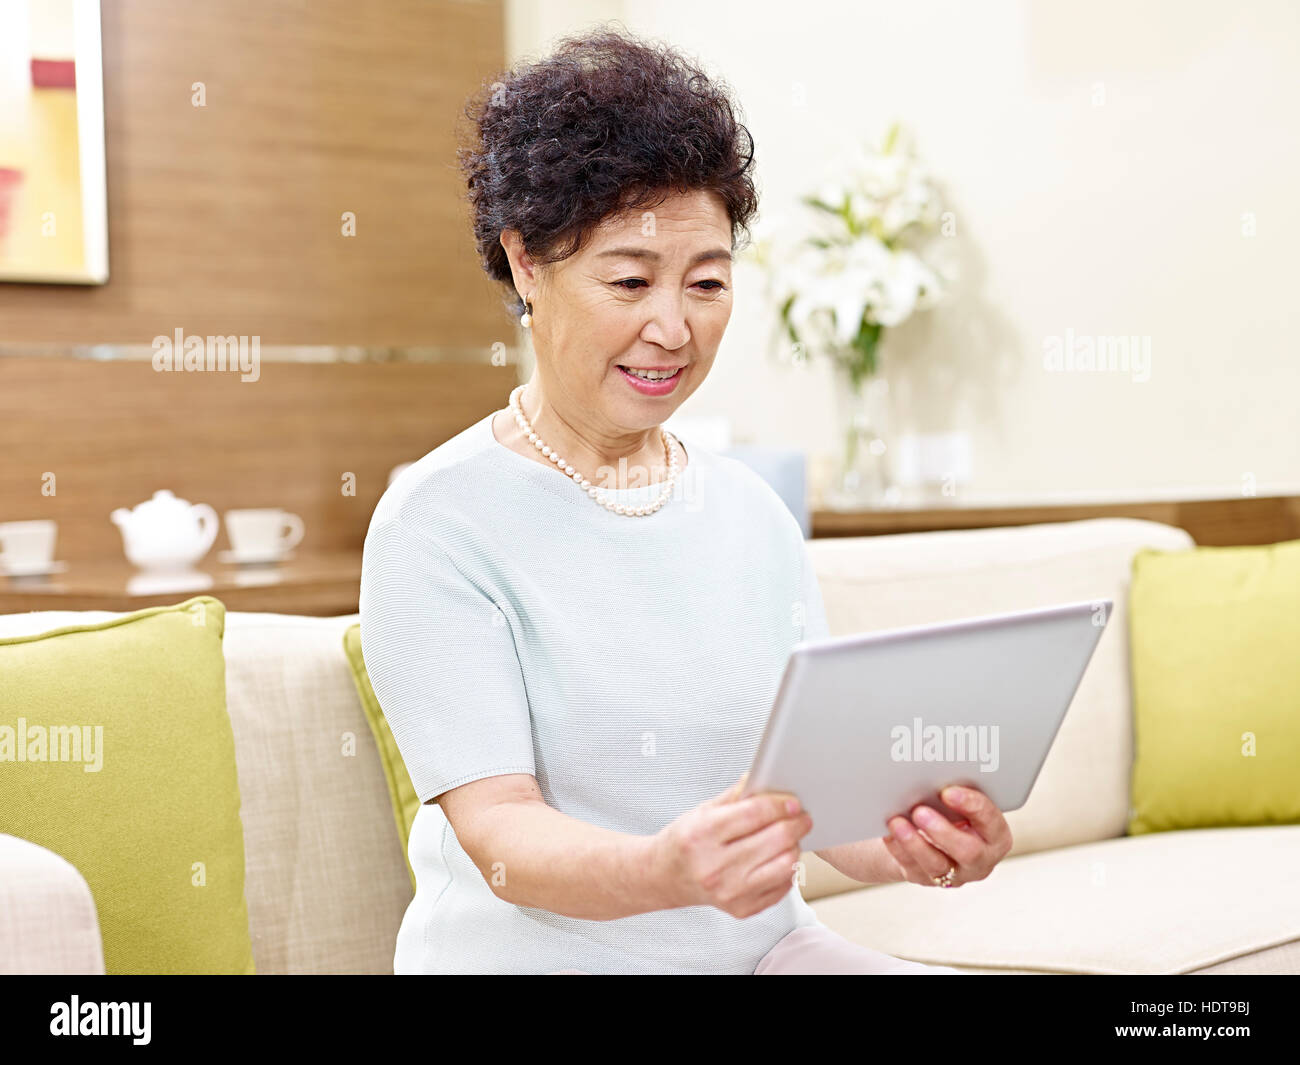 senior asian woman sitting on couch looking at tablet computer Stock Photo